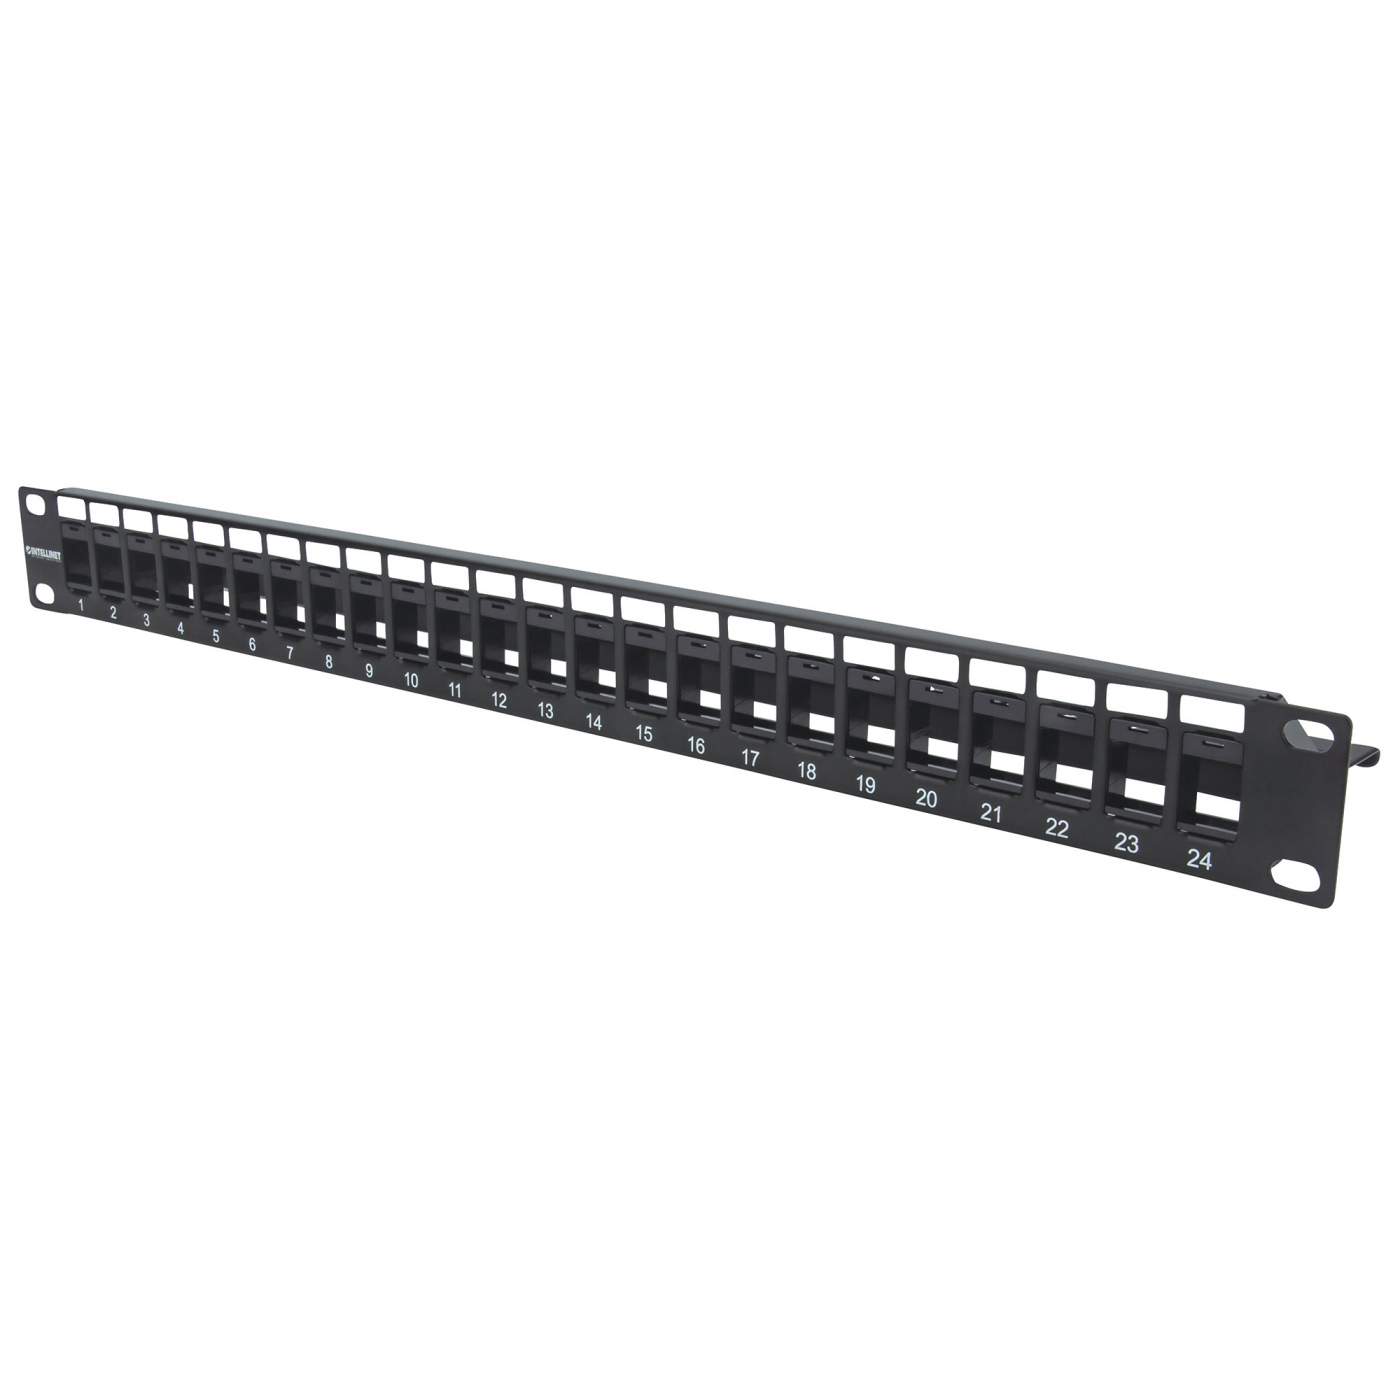 Blank Patch Panel Image 1